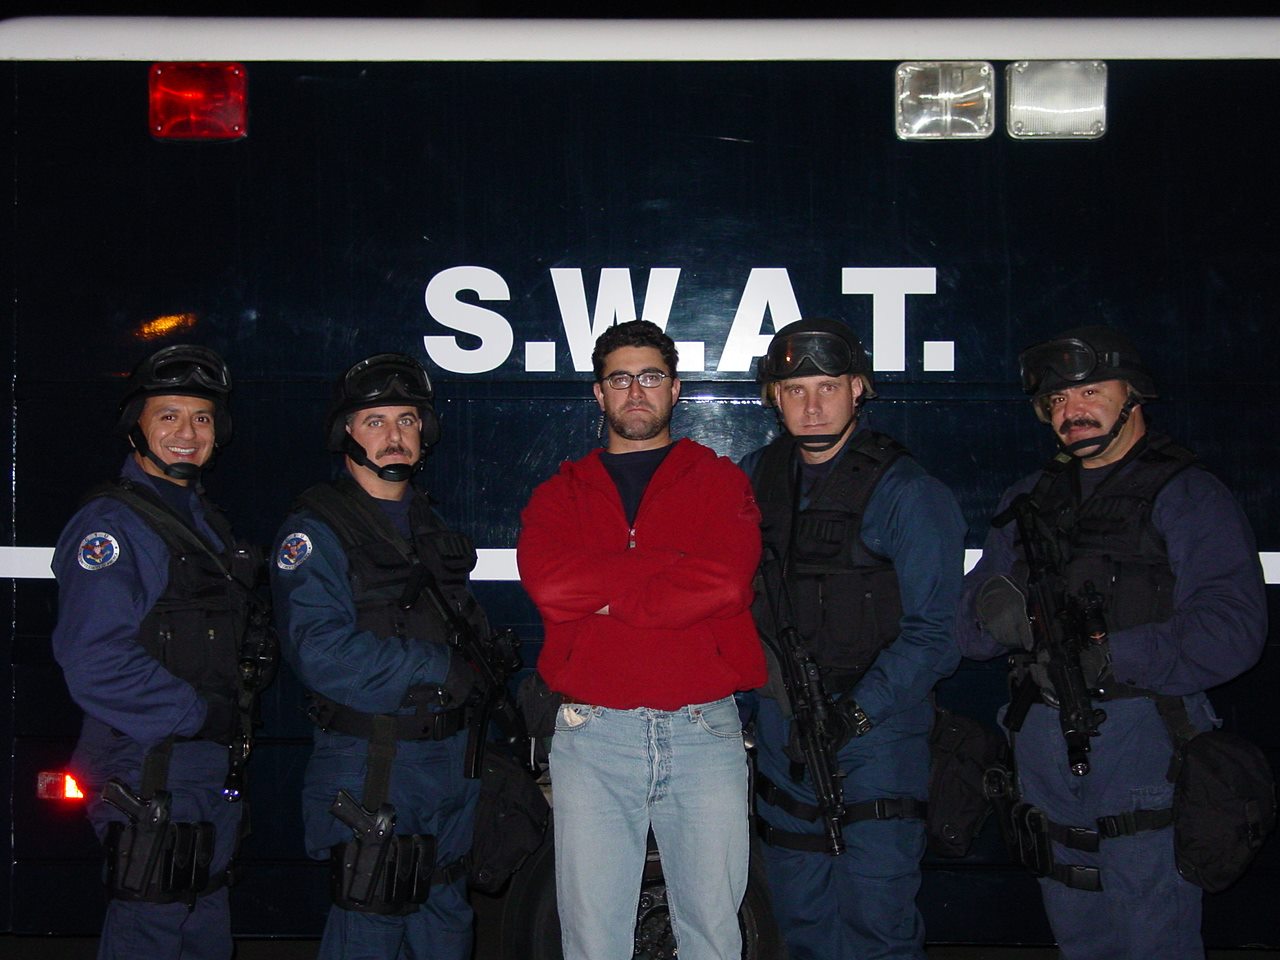 Real SWAT Operators on set as CTU Agents on location filming 24 with Kiefer Sutherland. Officers pictured with 1st AD *Tactical Casting provided by Patricia Homan Davila of SWAT4HIRE